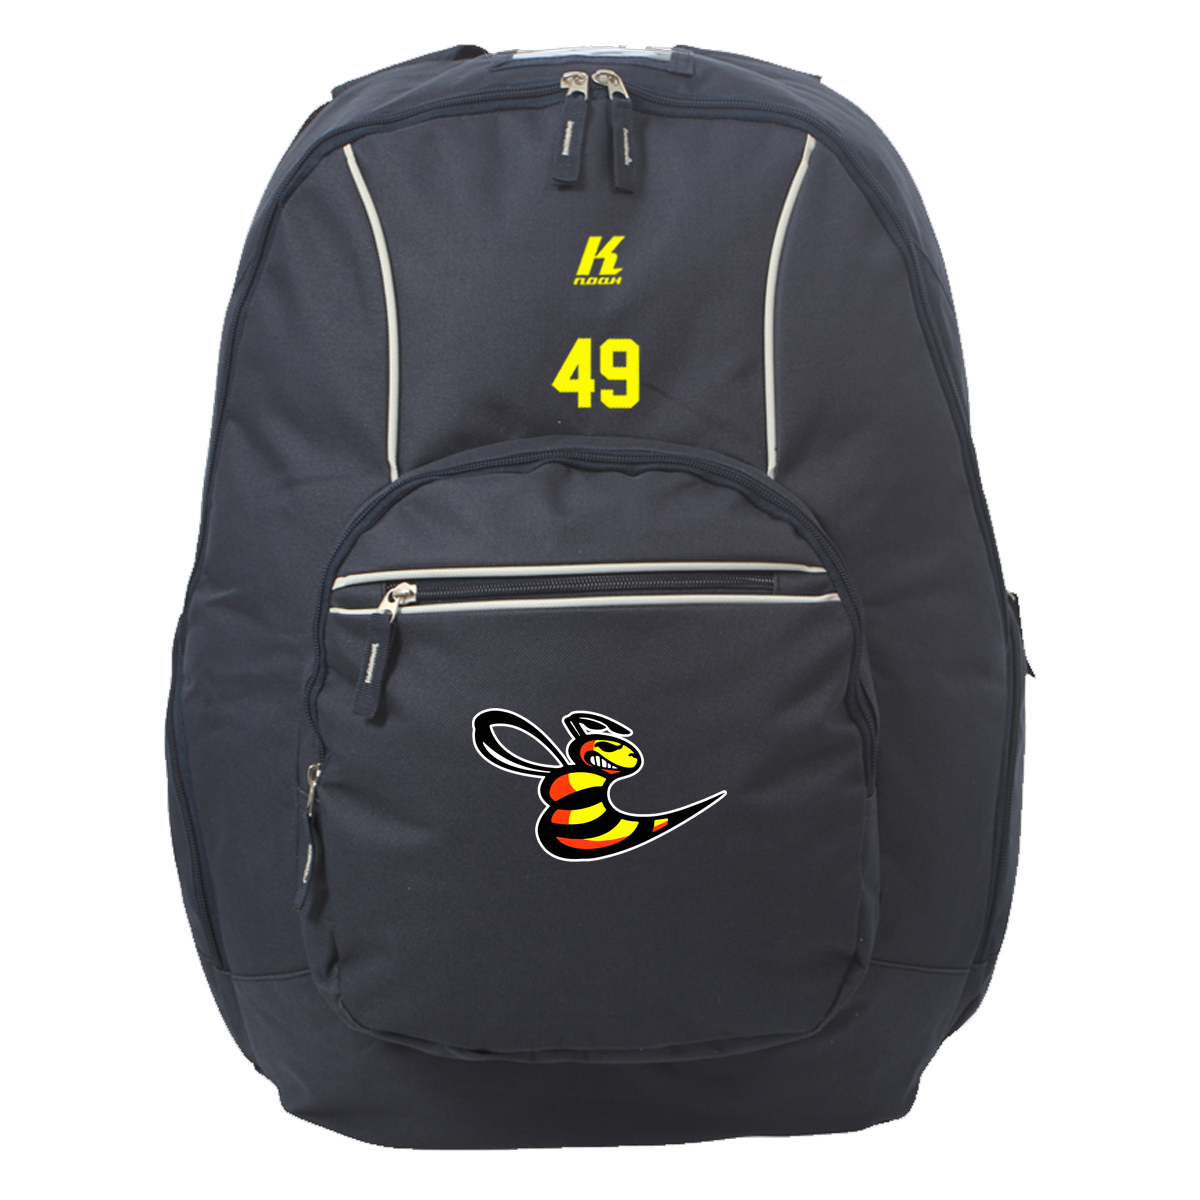 Hornets Heritage Backpack with Playernumber or Initials